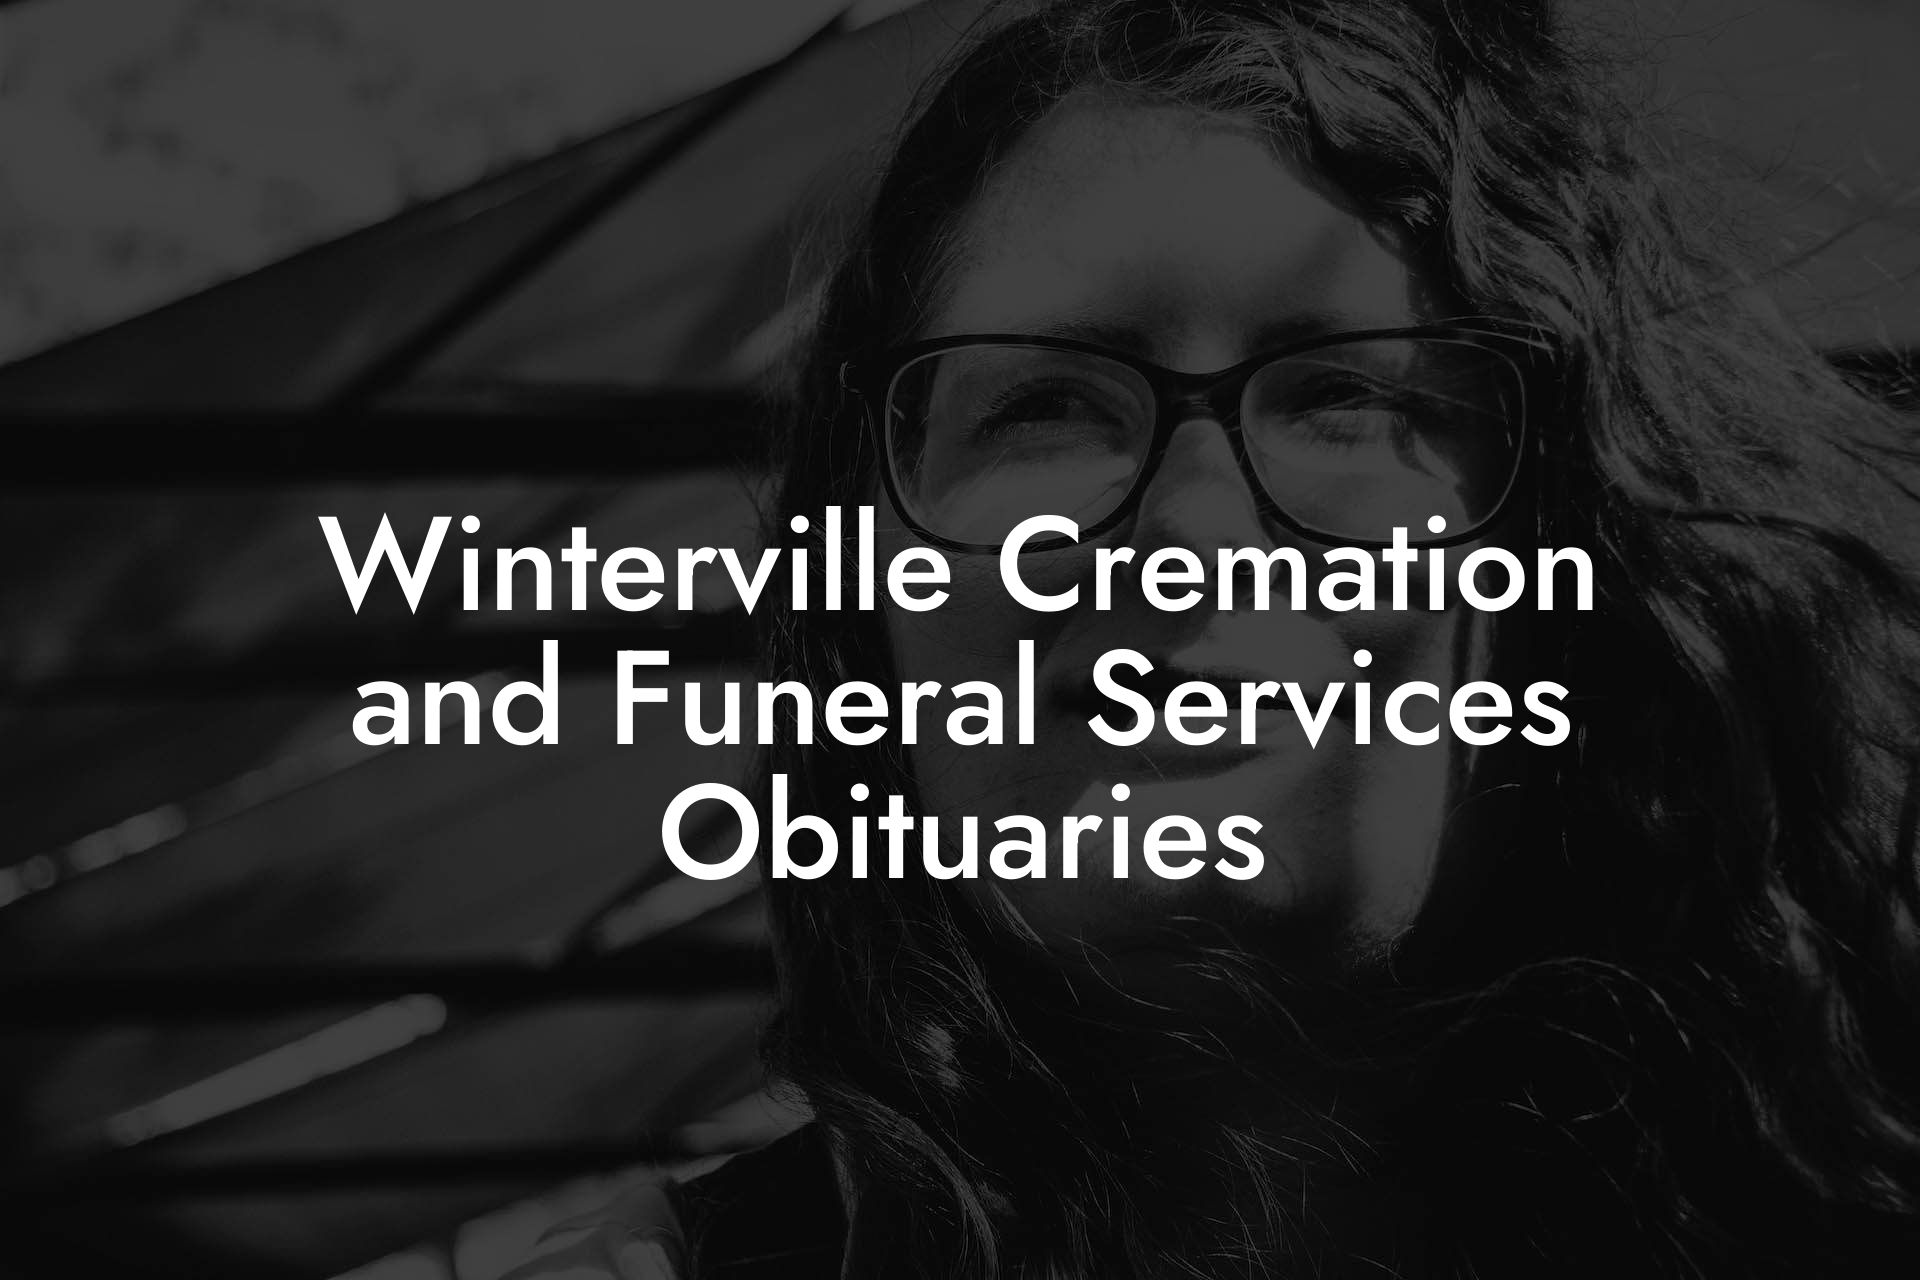 Winterville Cremation and Funeral Services Obituaries